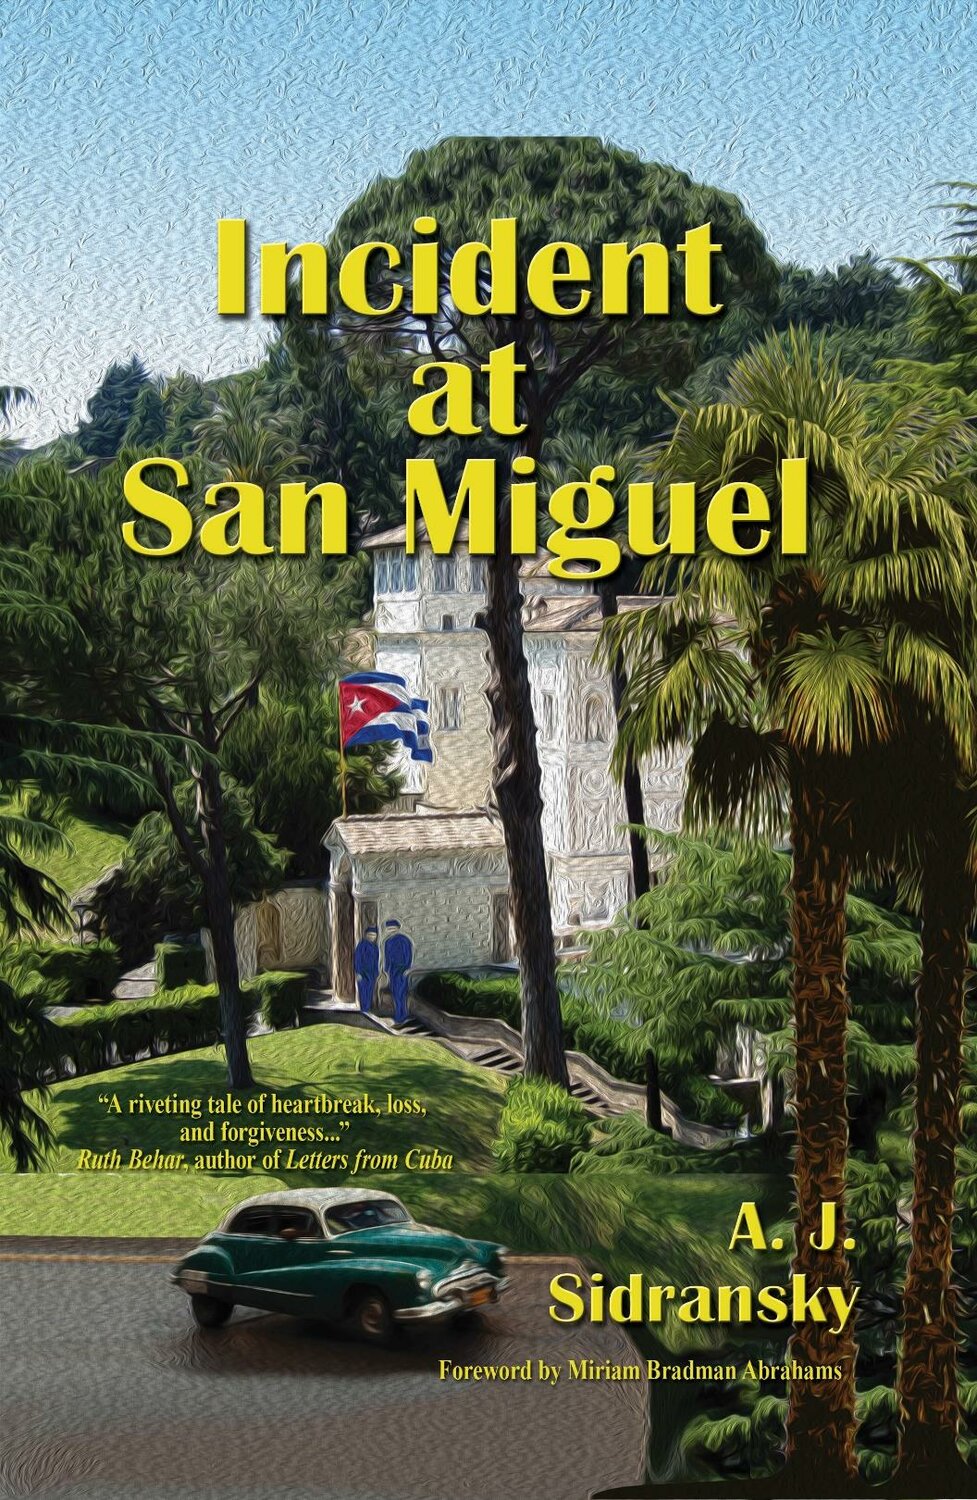 Miriam Bradman Abrahams wrote the foreword in AJ Sidransky’s new book ’Incident at San Miguel’ which describes Abrahams dramatic family story of emigrating from Cuba during the reign of Cuban dictator Fidel Castro.